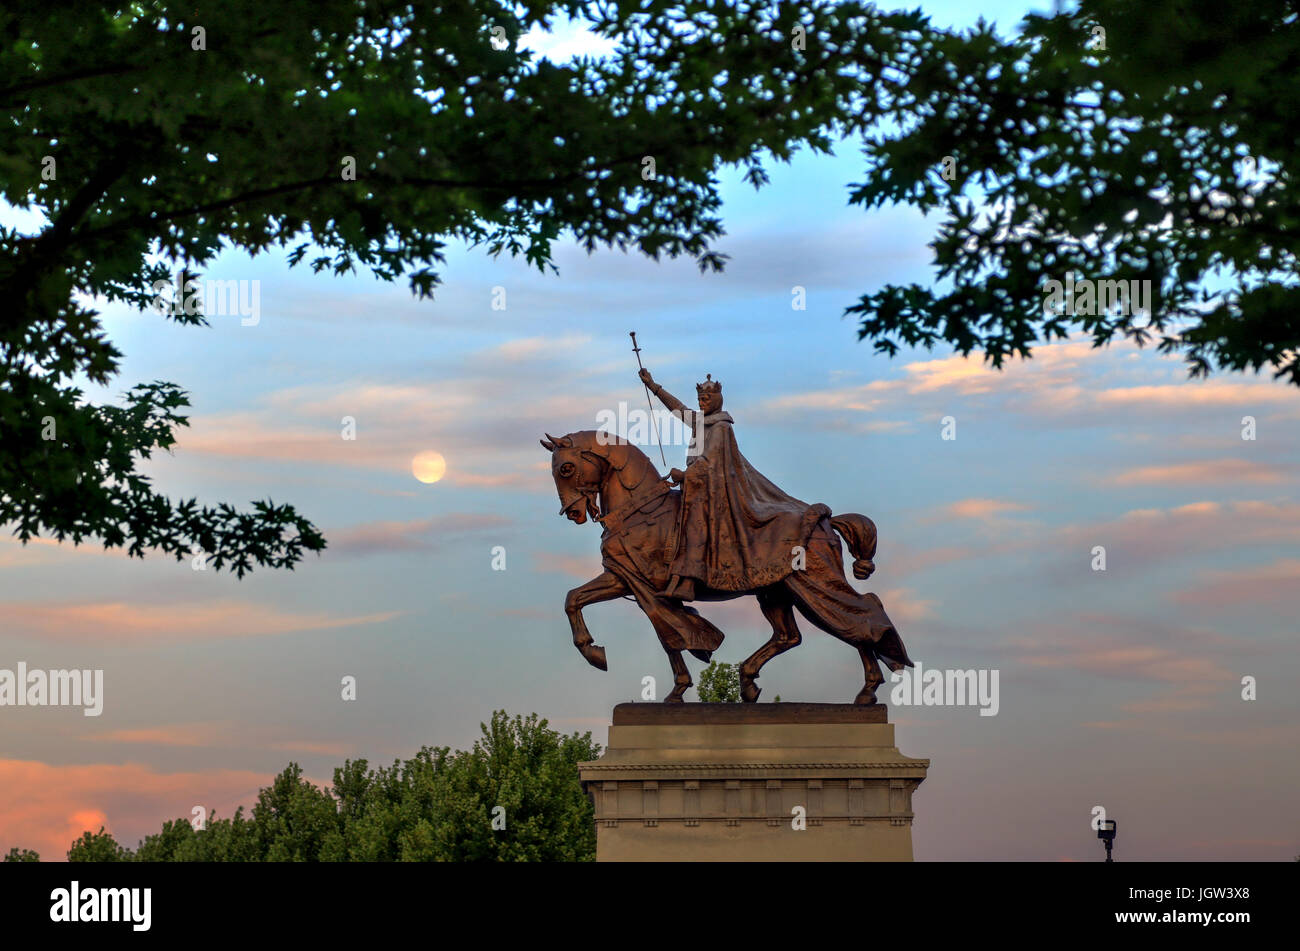 The moon over the Apotheosis of St. Louis statue of King Louis IX of France, namesake of St. Louis, Missouri in Forest Park, St. Louis, Missouri. Stock Photo